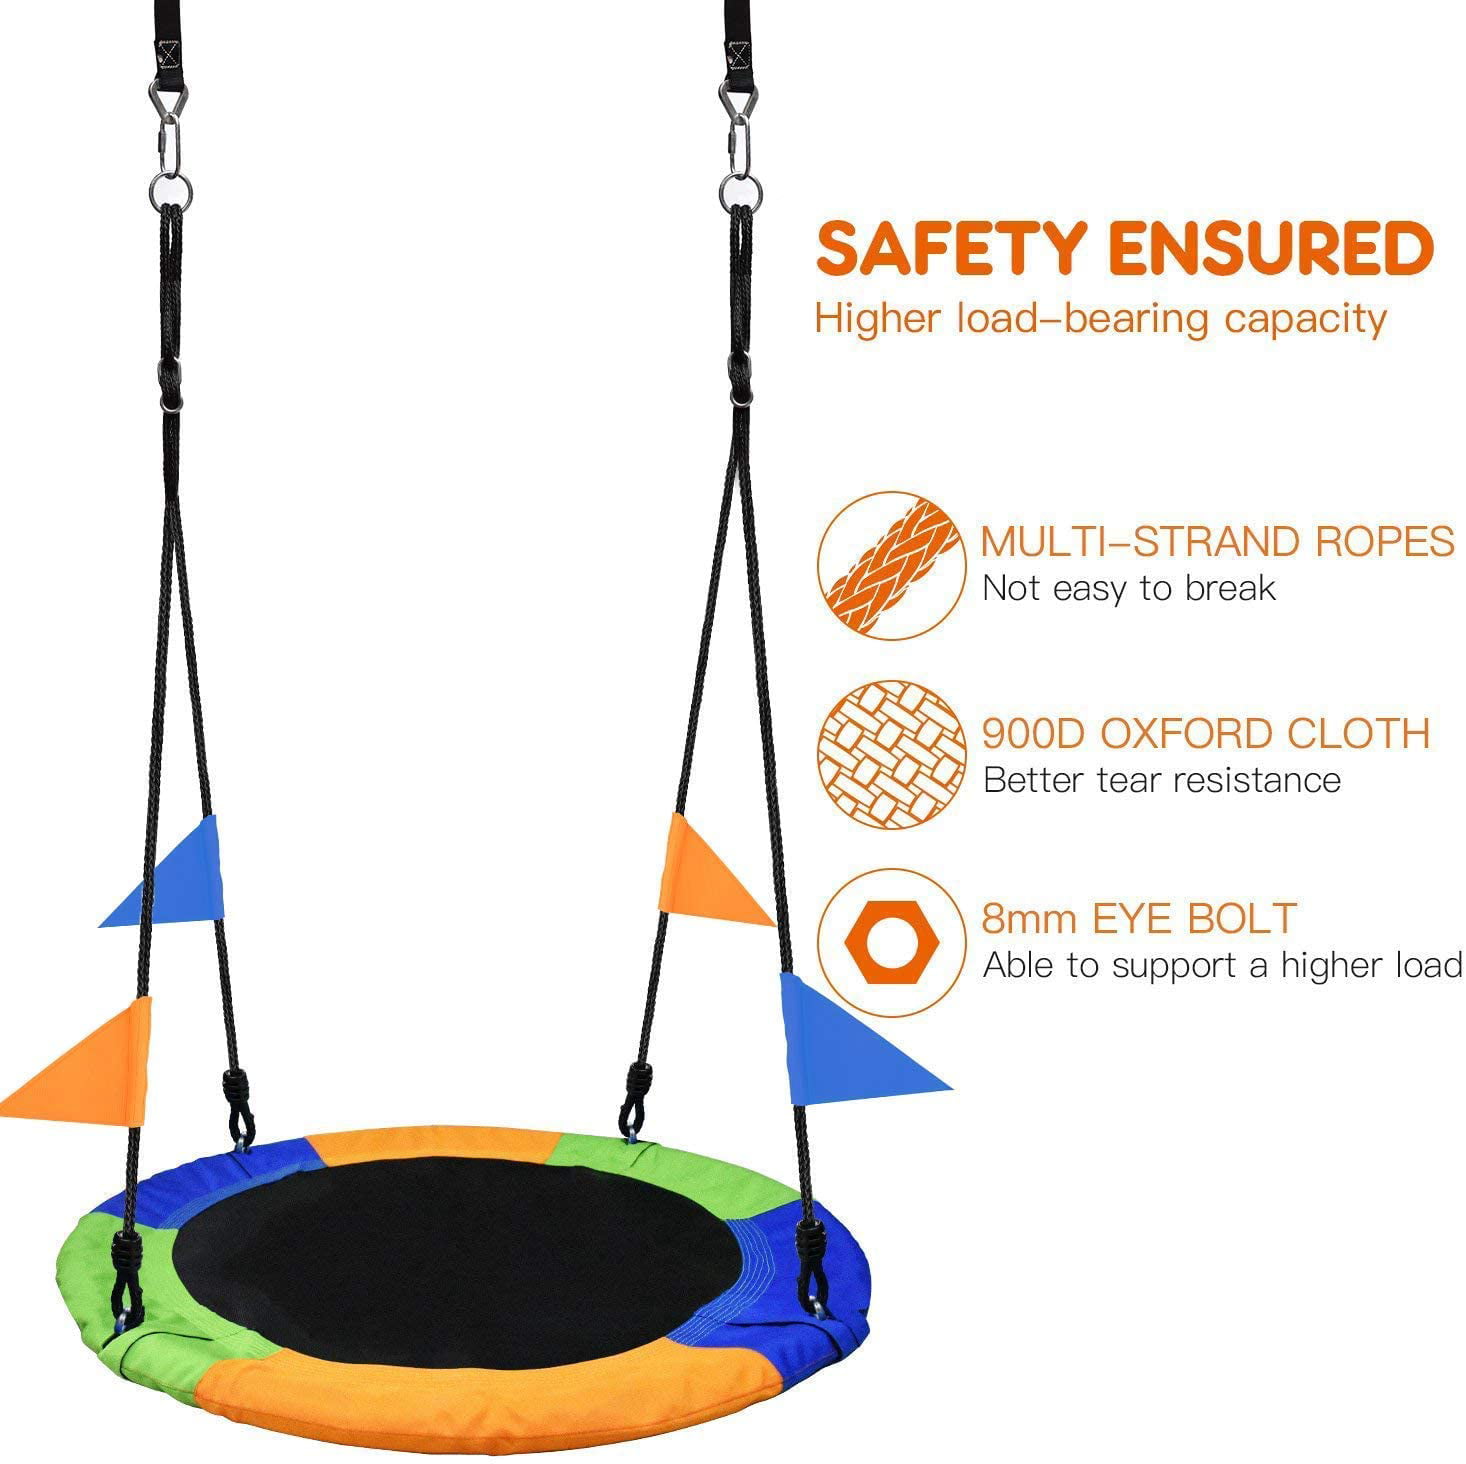 40'' Saucer Tree Swing Flying 660lb Multi-Strand Ropes Colorful and Safety Swing 